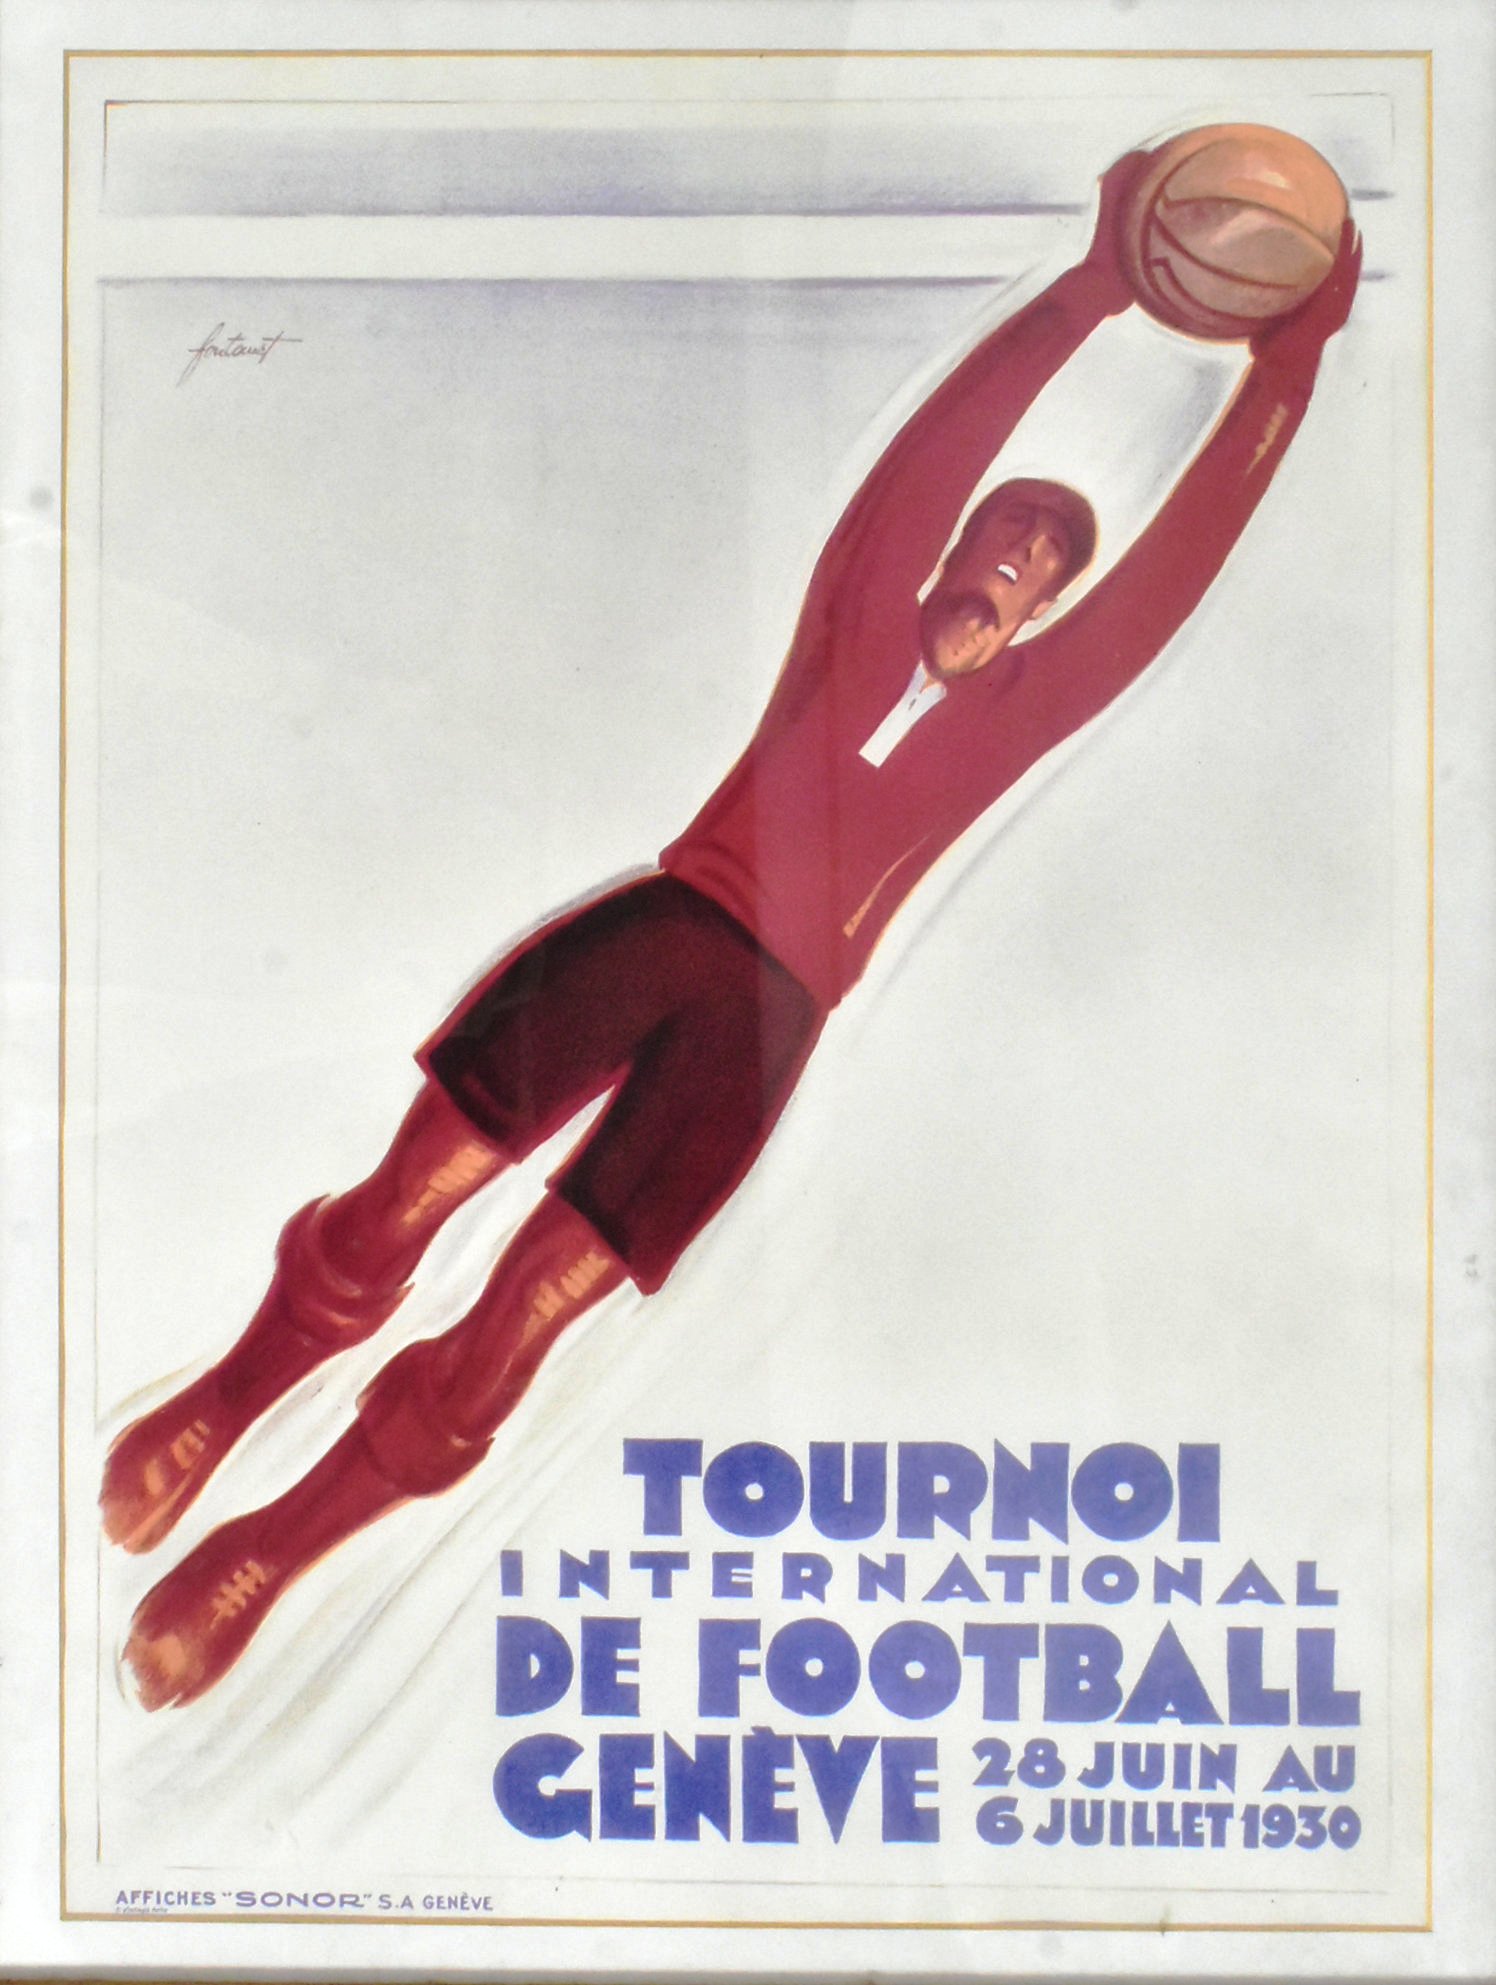 AFTER NOEL FONTANET - INTERNATIONAL FOOTBALL TOURNAMENT POSTER - Image 2 of 3